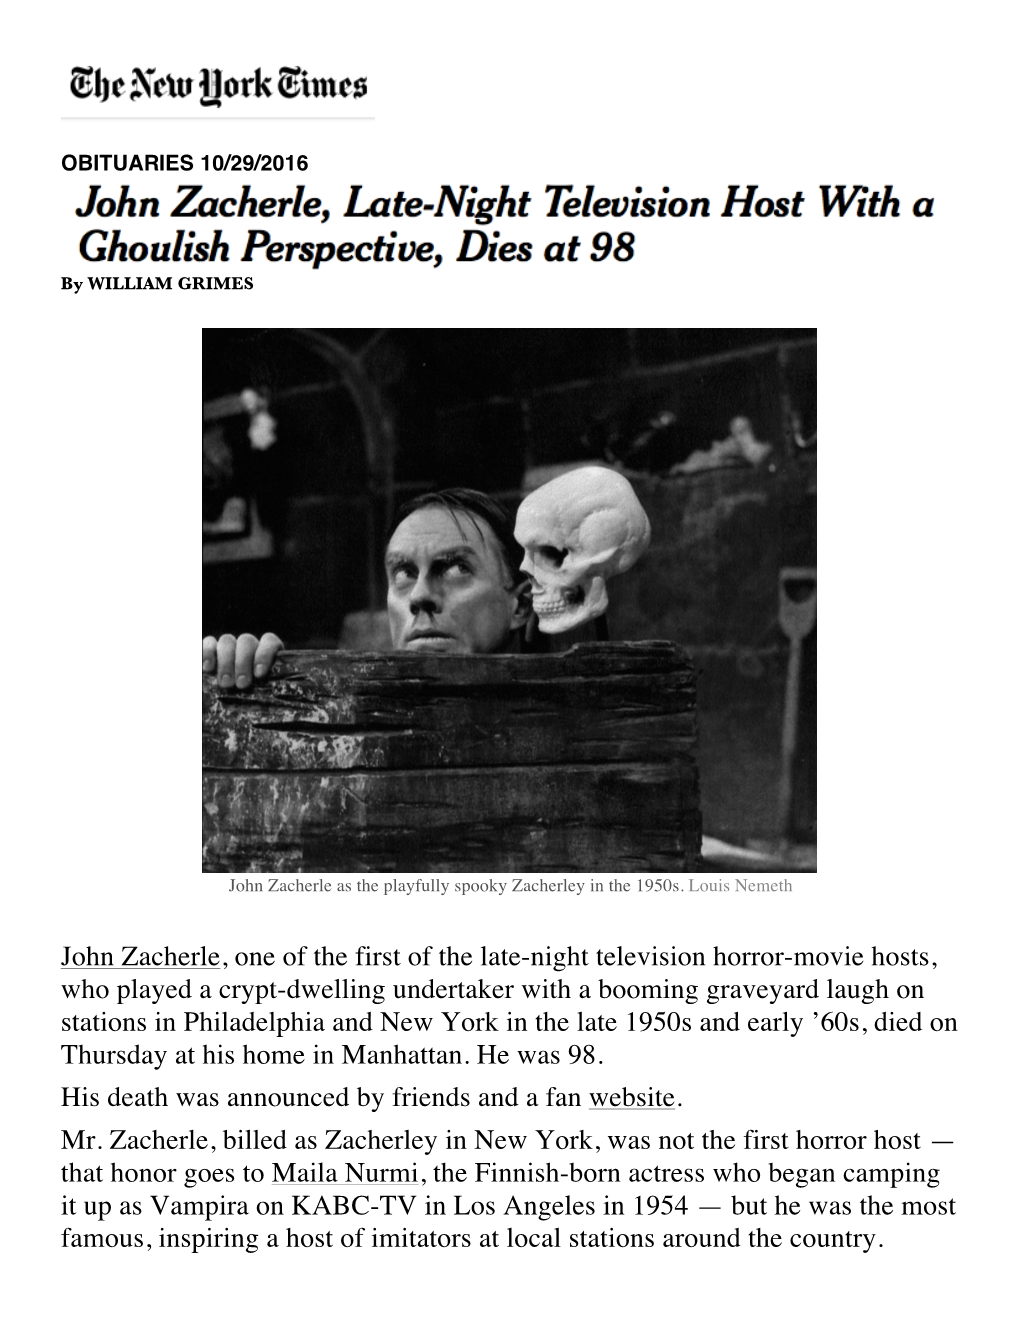 John Zacherle, One of the First of the Late-Night Television Horror-Movie